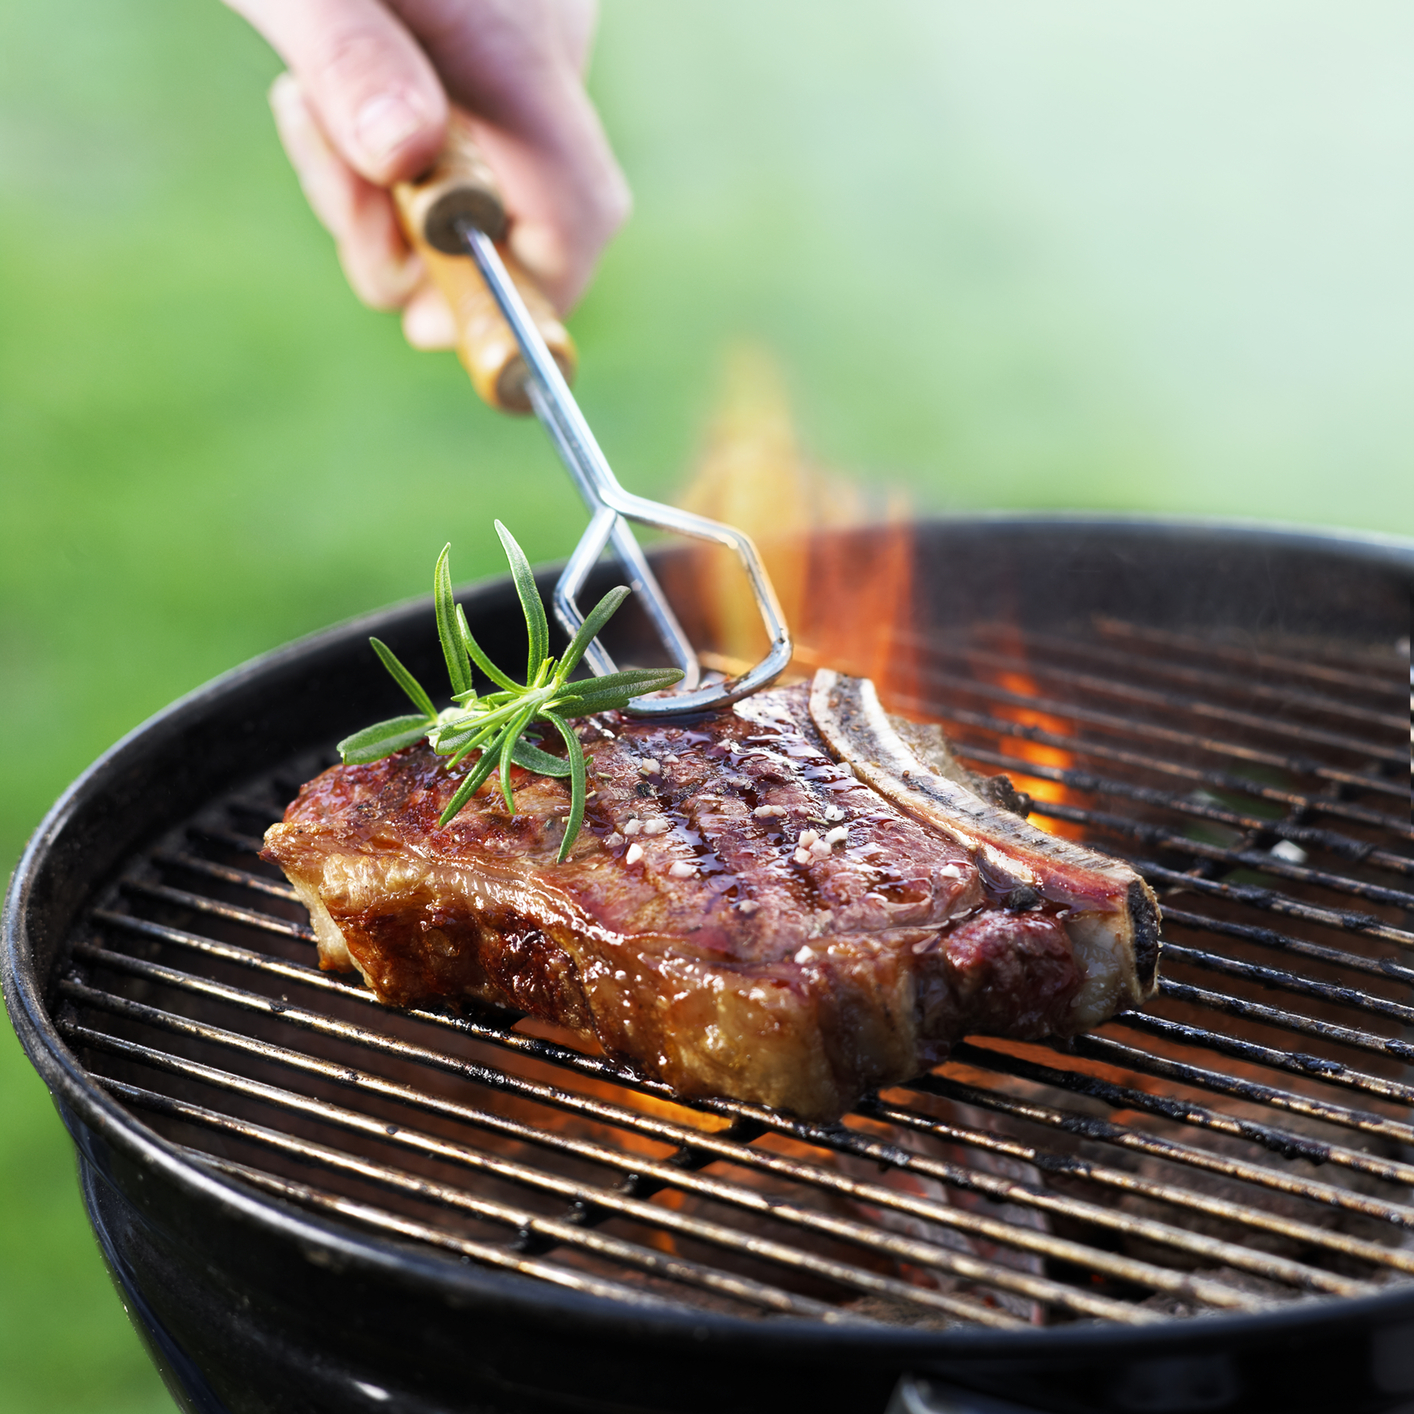  Recipes for the Perfect Barbecue